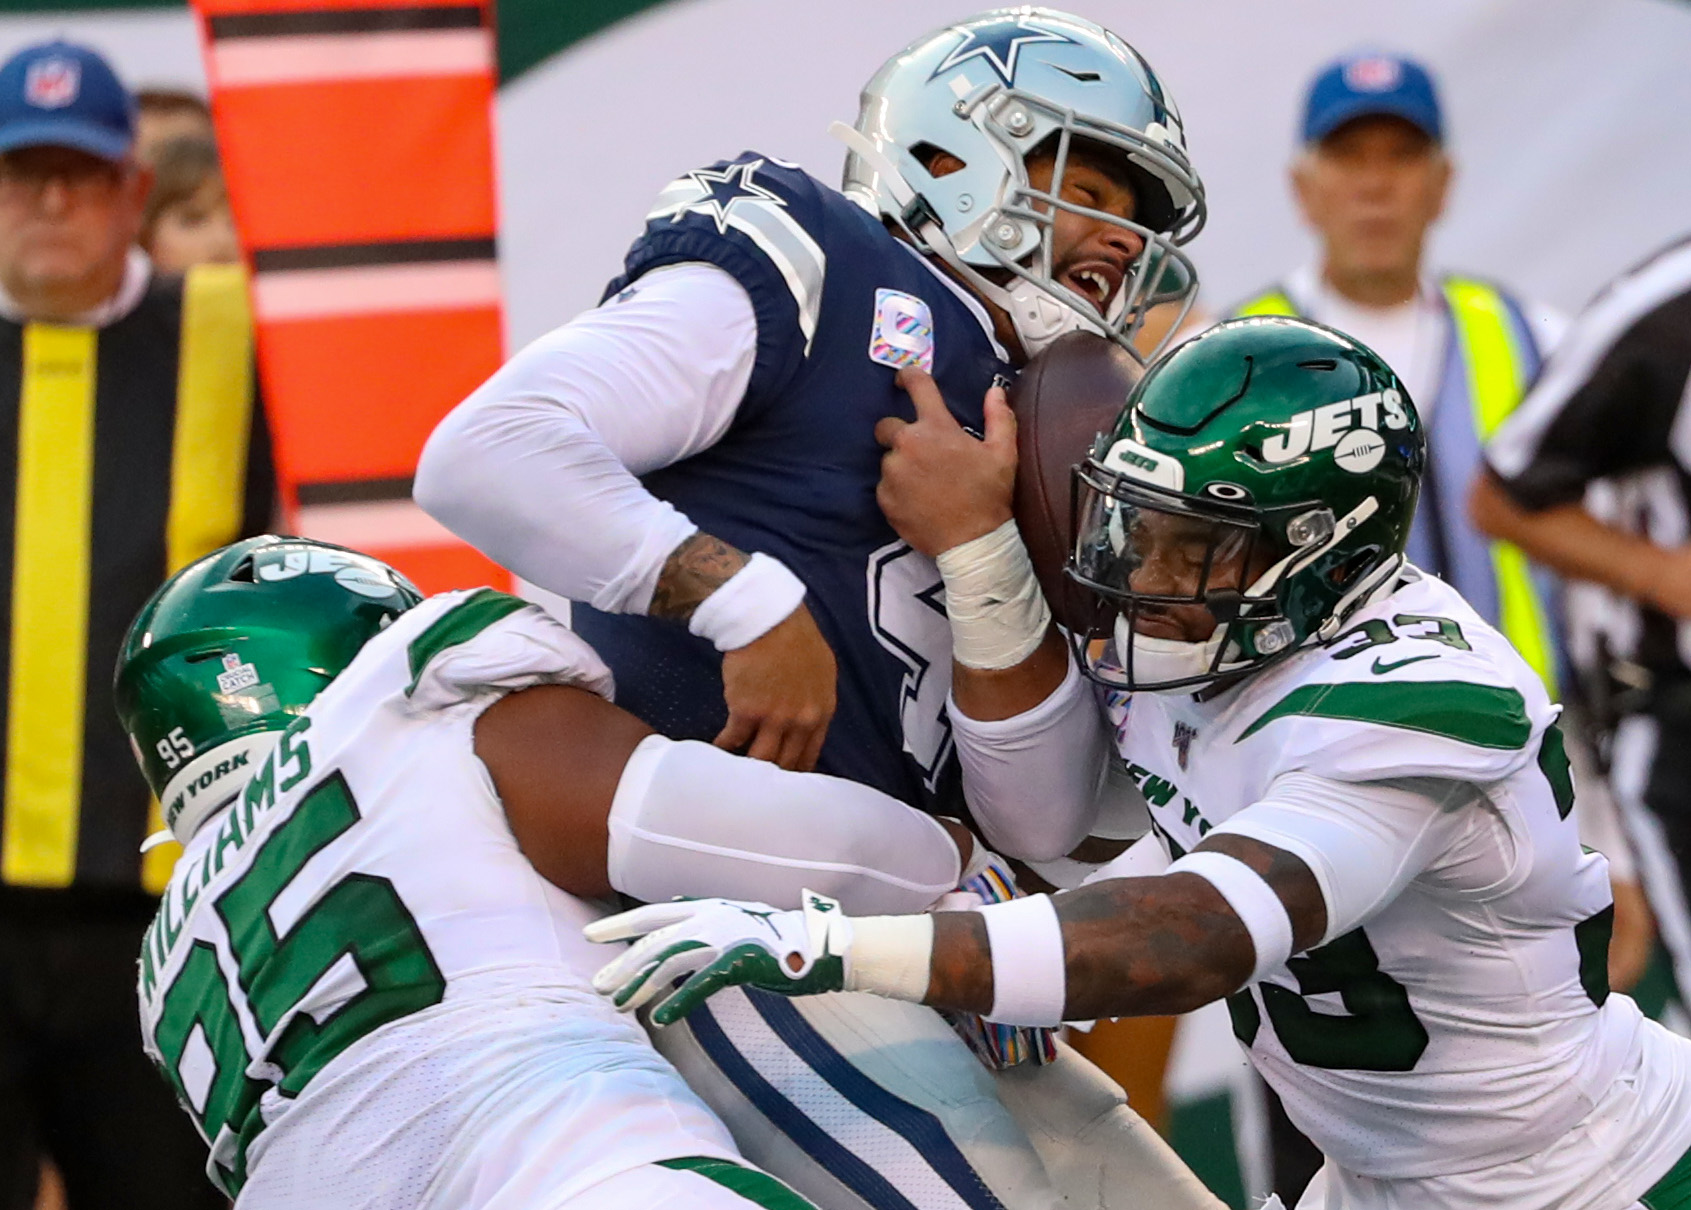 New York Jets vs. Dallas Cowboys: How to Watch the NFL Week 2 Game